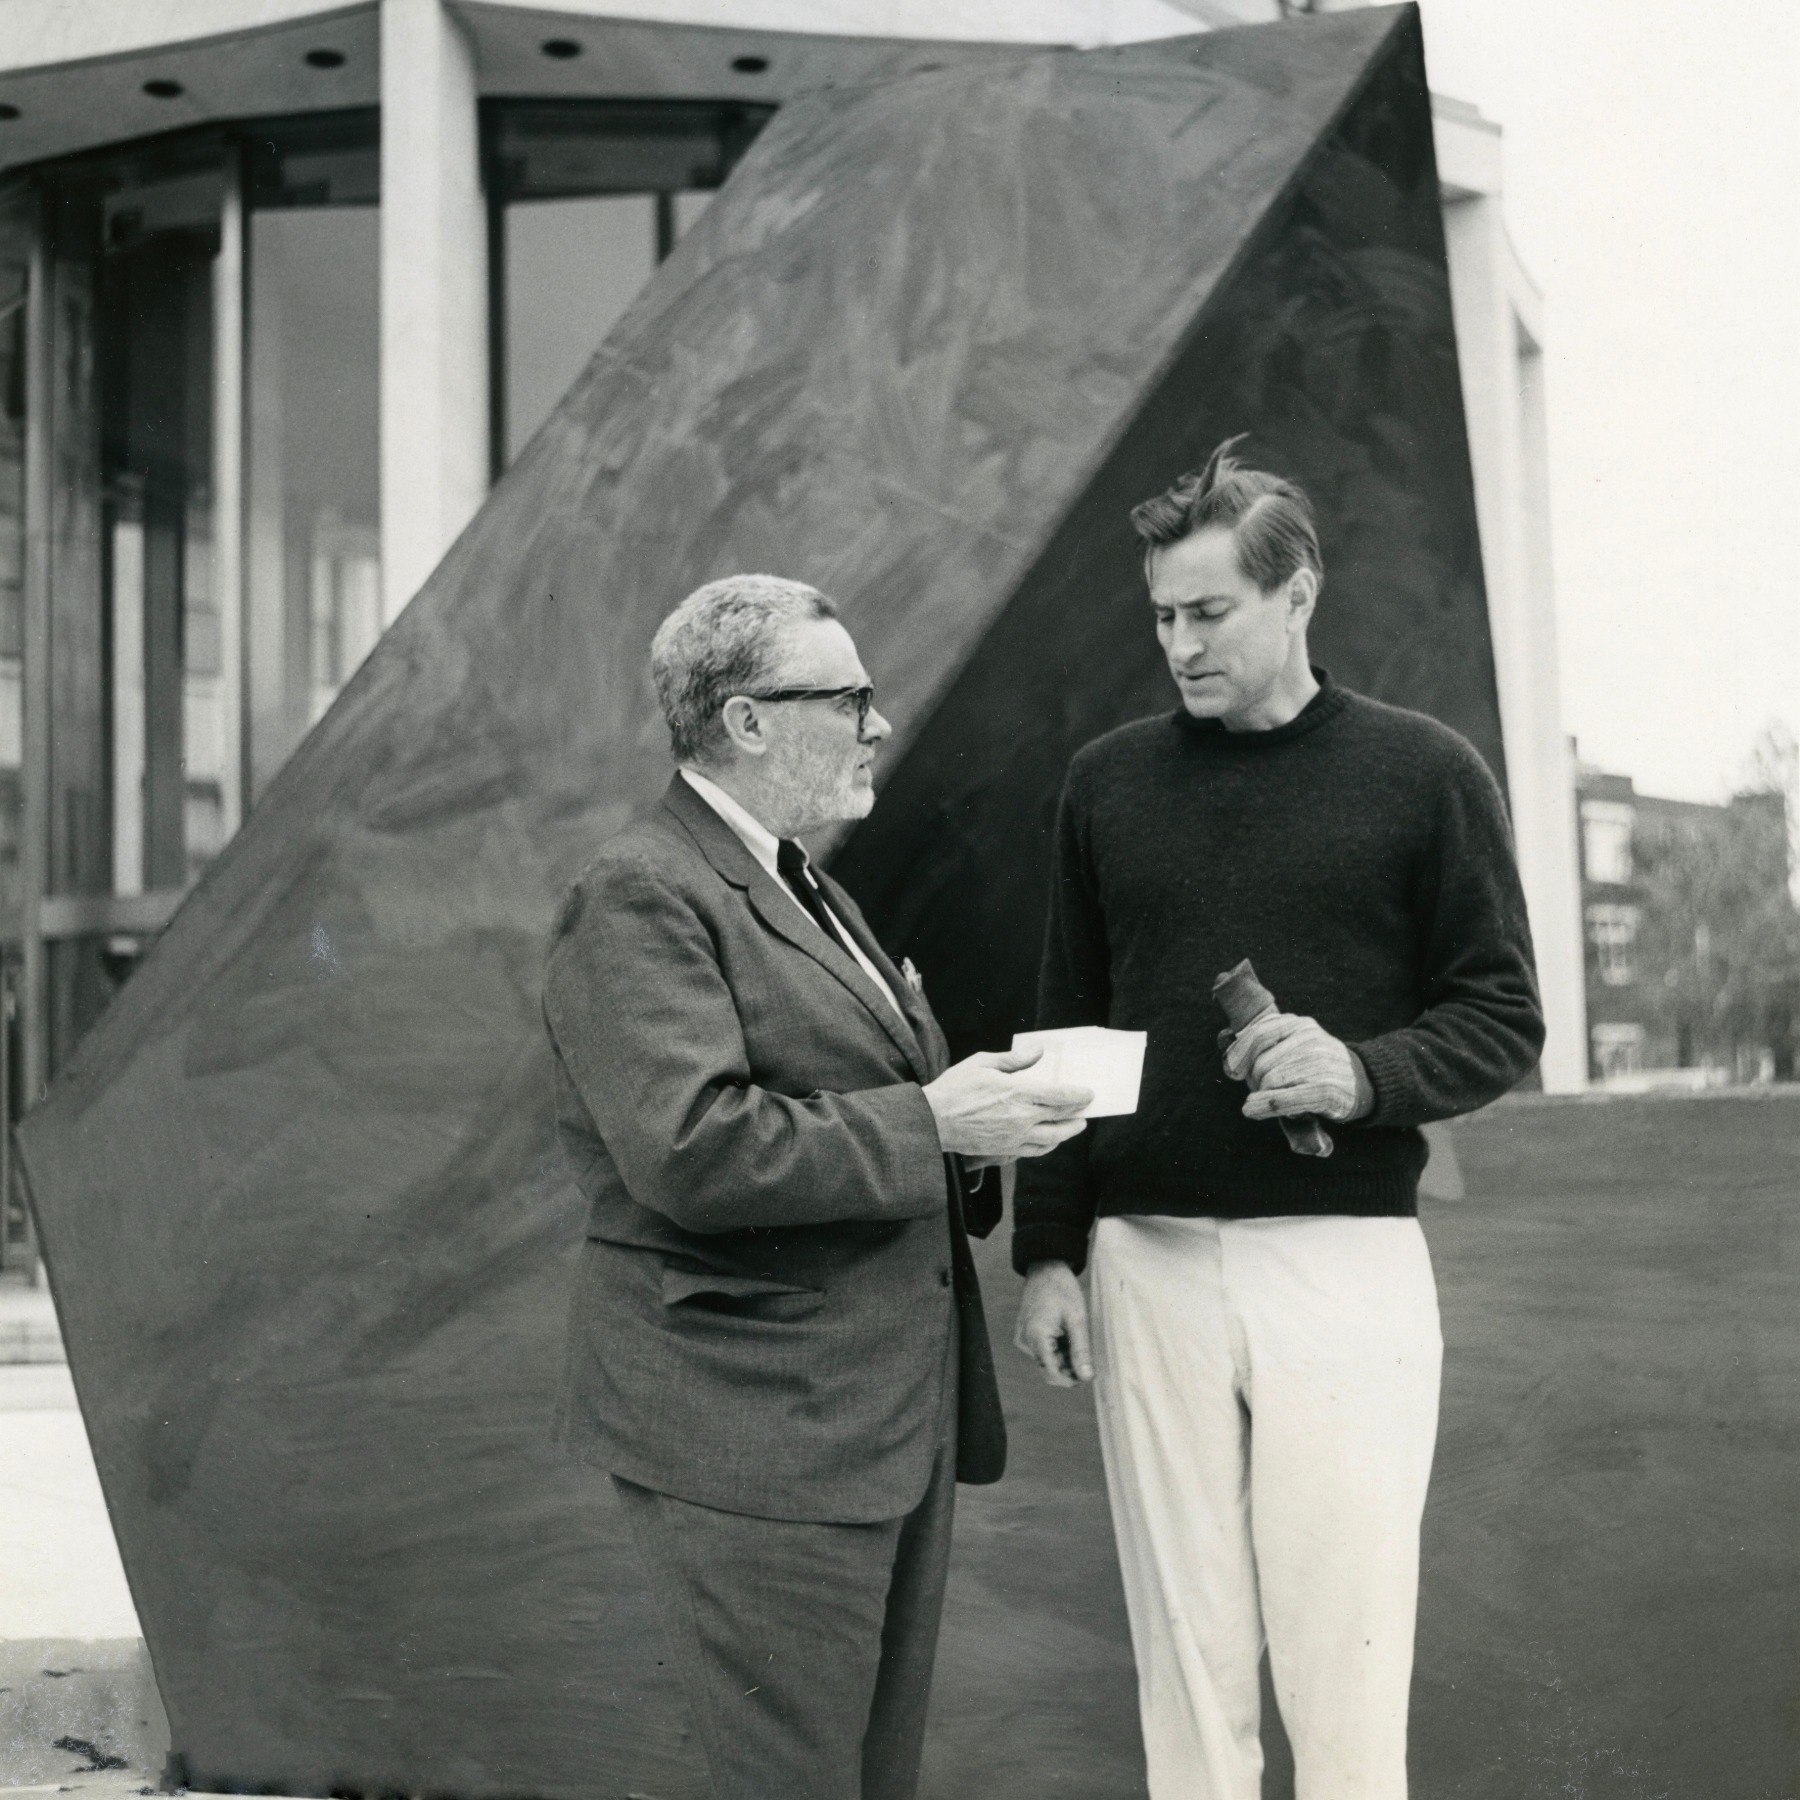 Tony Smith and Sam Wagstaff in front of the painted plywood mock-up of&amp;nbsp;Spitball&amp;nbsp;(1961) on the Travelers Plaza across the street from the Wadsworth Atheneum, during the installation of Smith&amp;rsquo;s solo exhibition, in 1966.&amp;nbsp;Courtesy Wadsworth Atheneum,&amp;nbsp;Hartford, Connecticut.